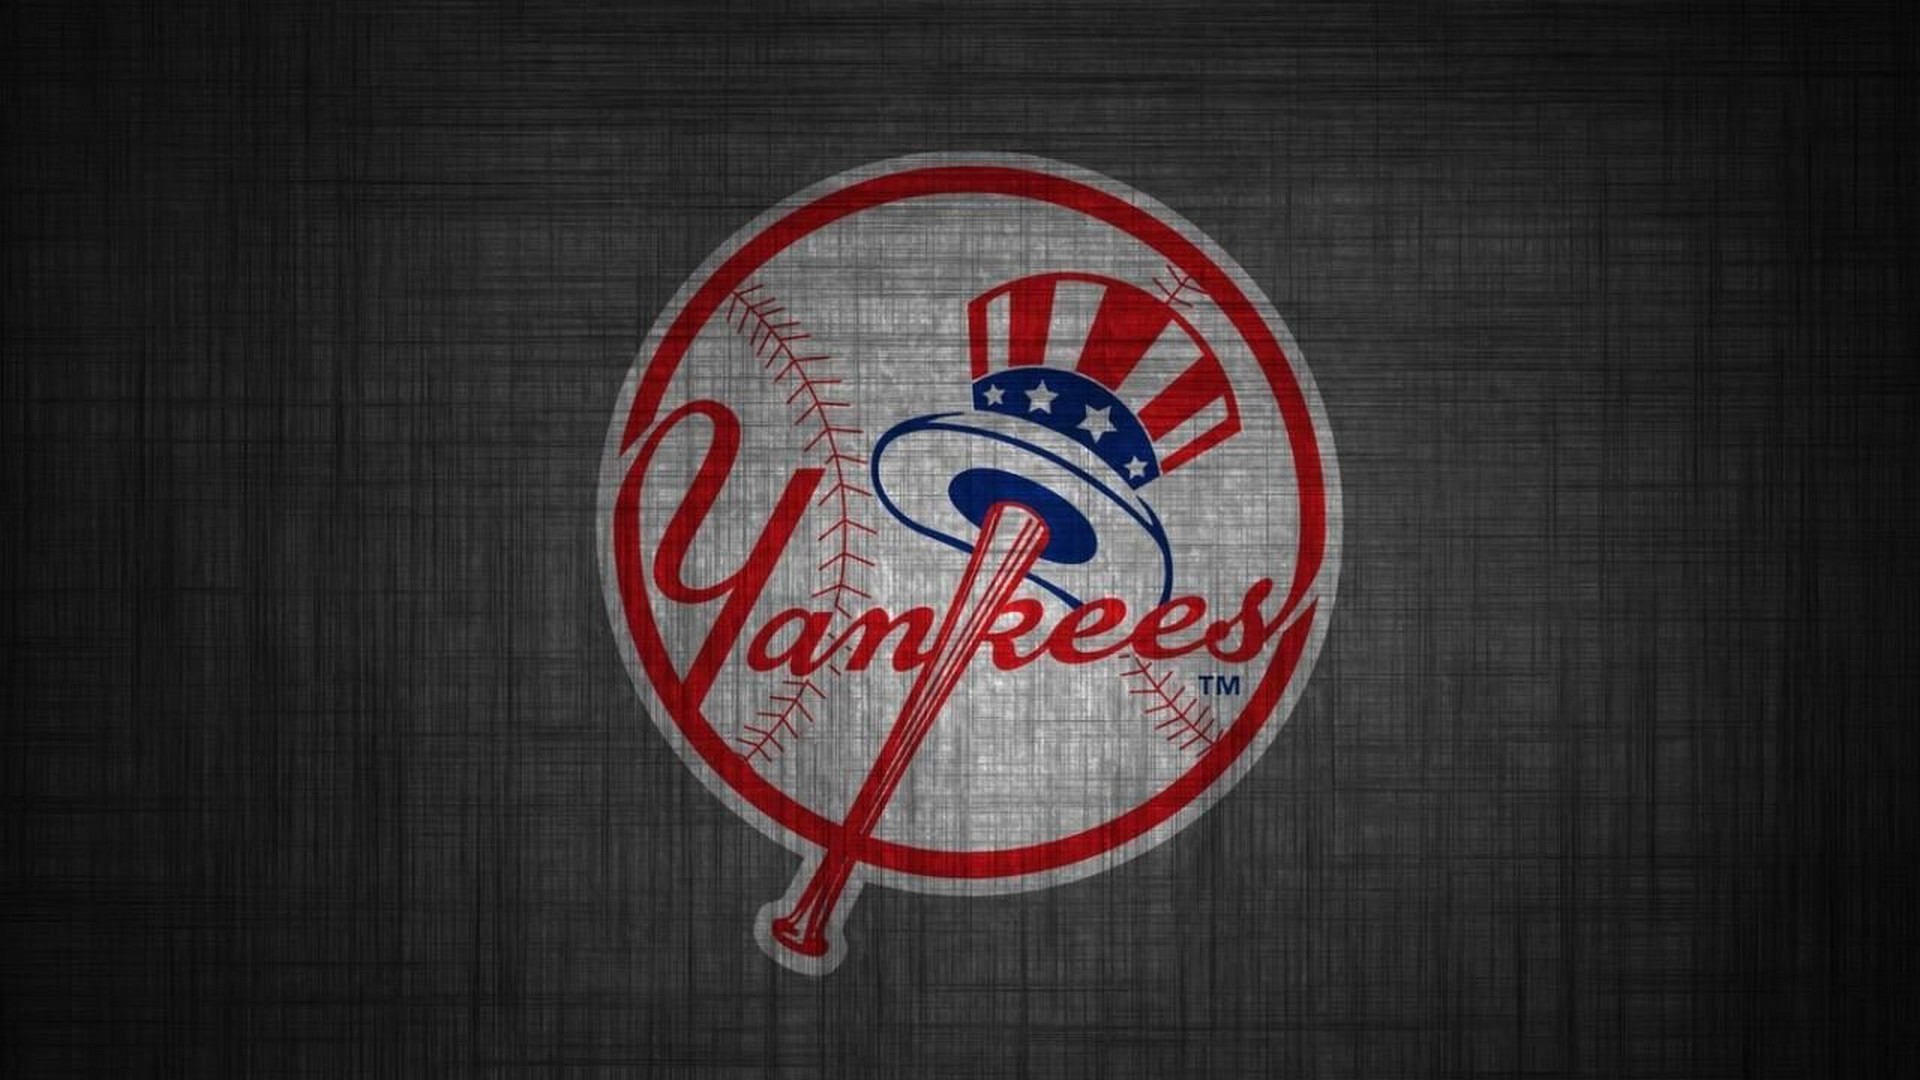 New York Yankees Laptop Wallpaper with high-resolution 1920x1080 pixel. You can use this wallpaper for Mac Desktop Wallpaper, Laptop Screensavers, Android Wallpapers, Tablet or iPhone Home Screen and another mobile phone device